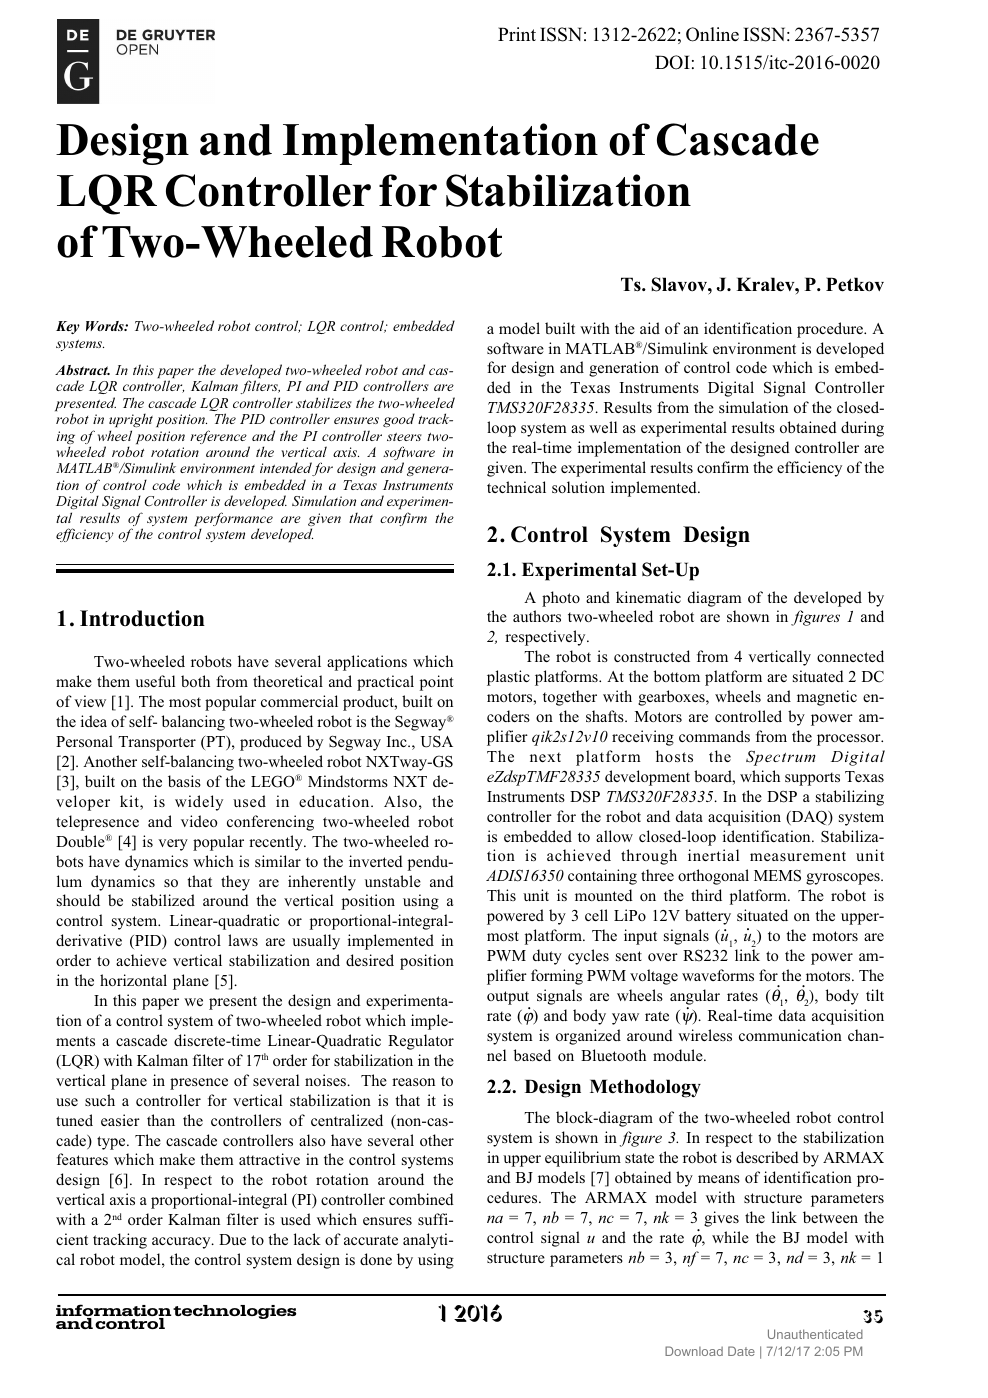 Design And Implementation Of Cascade Lqr Controller For Stabilization Of Two Wheeled Robot Topic Of Research Paper In Mechanical Engineering Download Scholarly Article Pdf And Read For Free On Cyberleninka Open Science